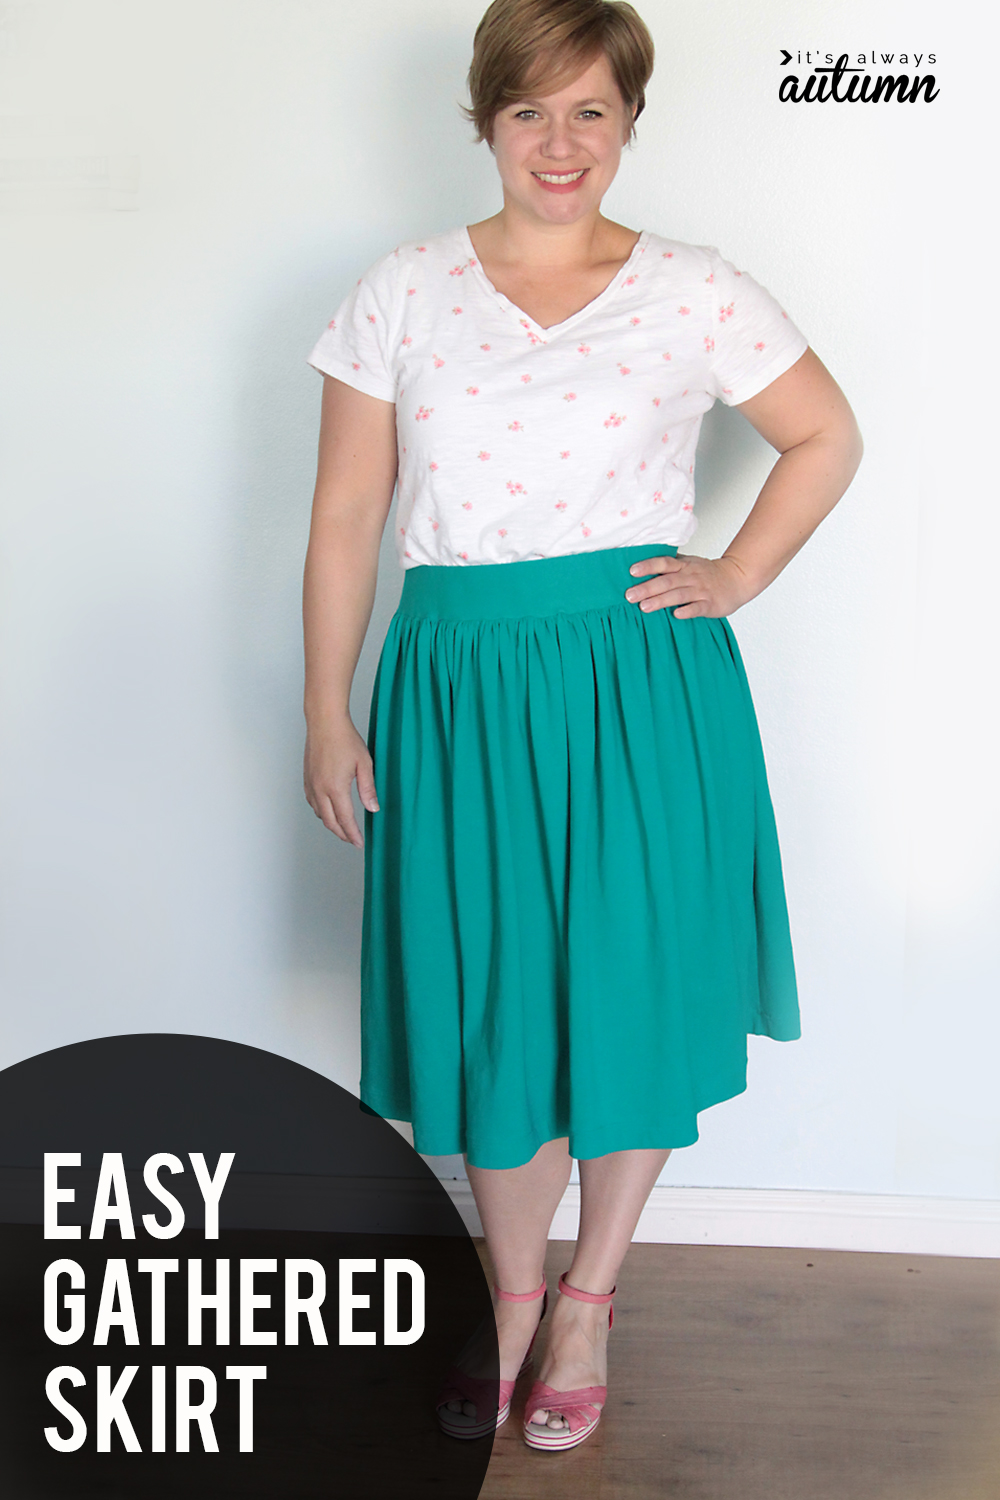 How to make a DIY gathered skirt! Easy gathered skirt tutorial with a flat elastic waistband.